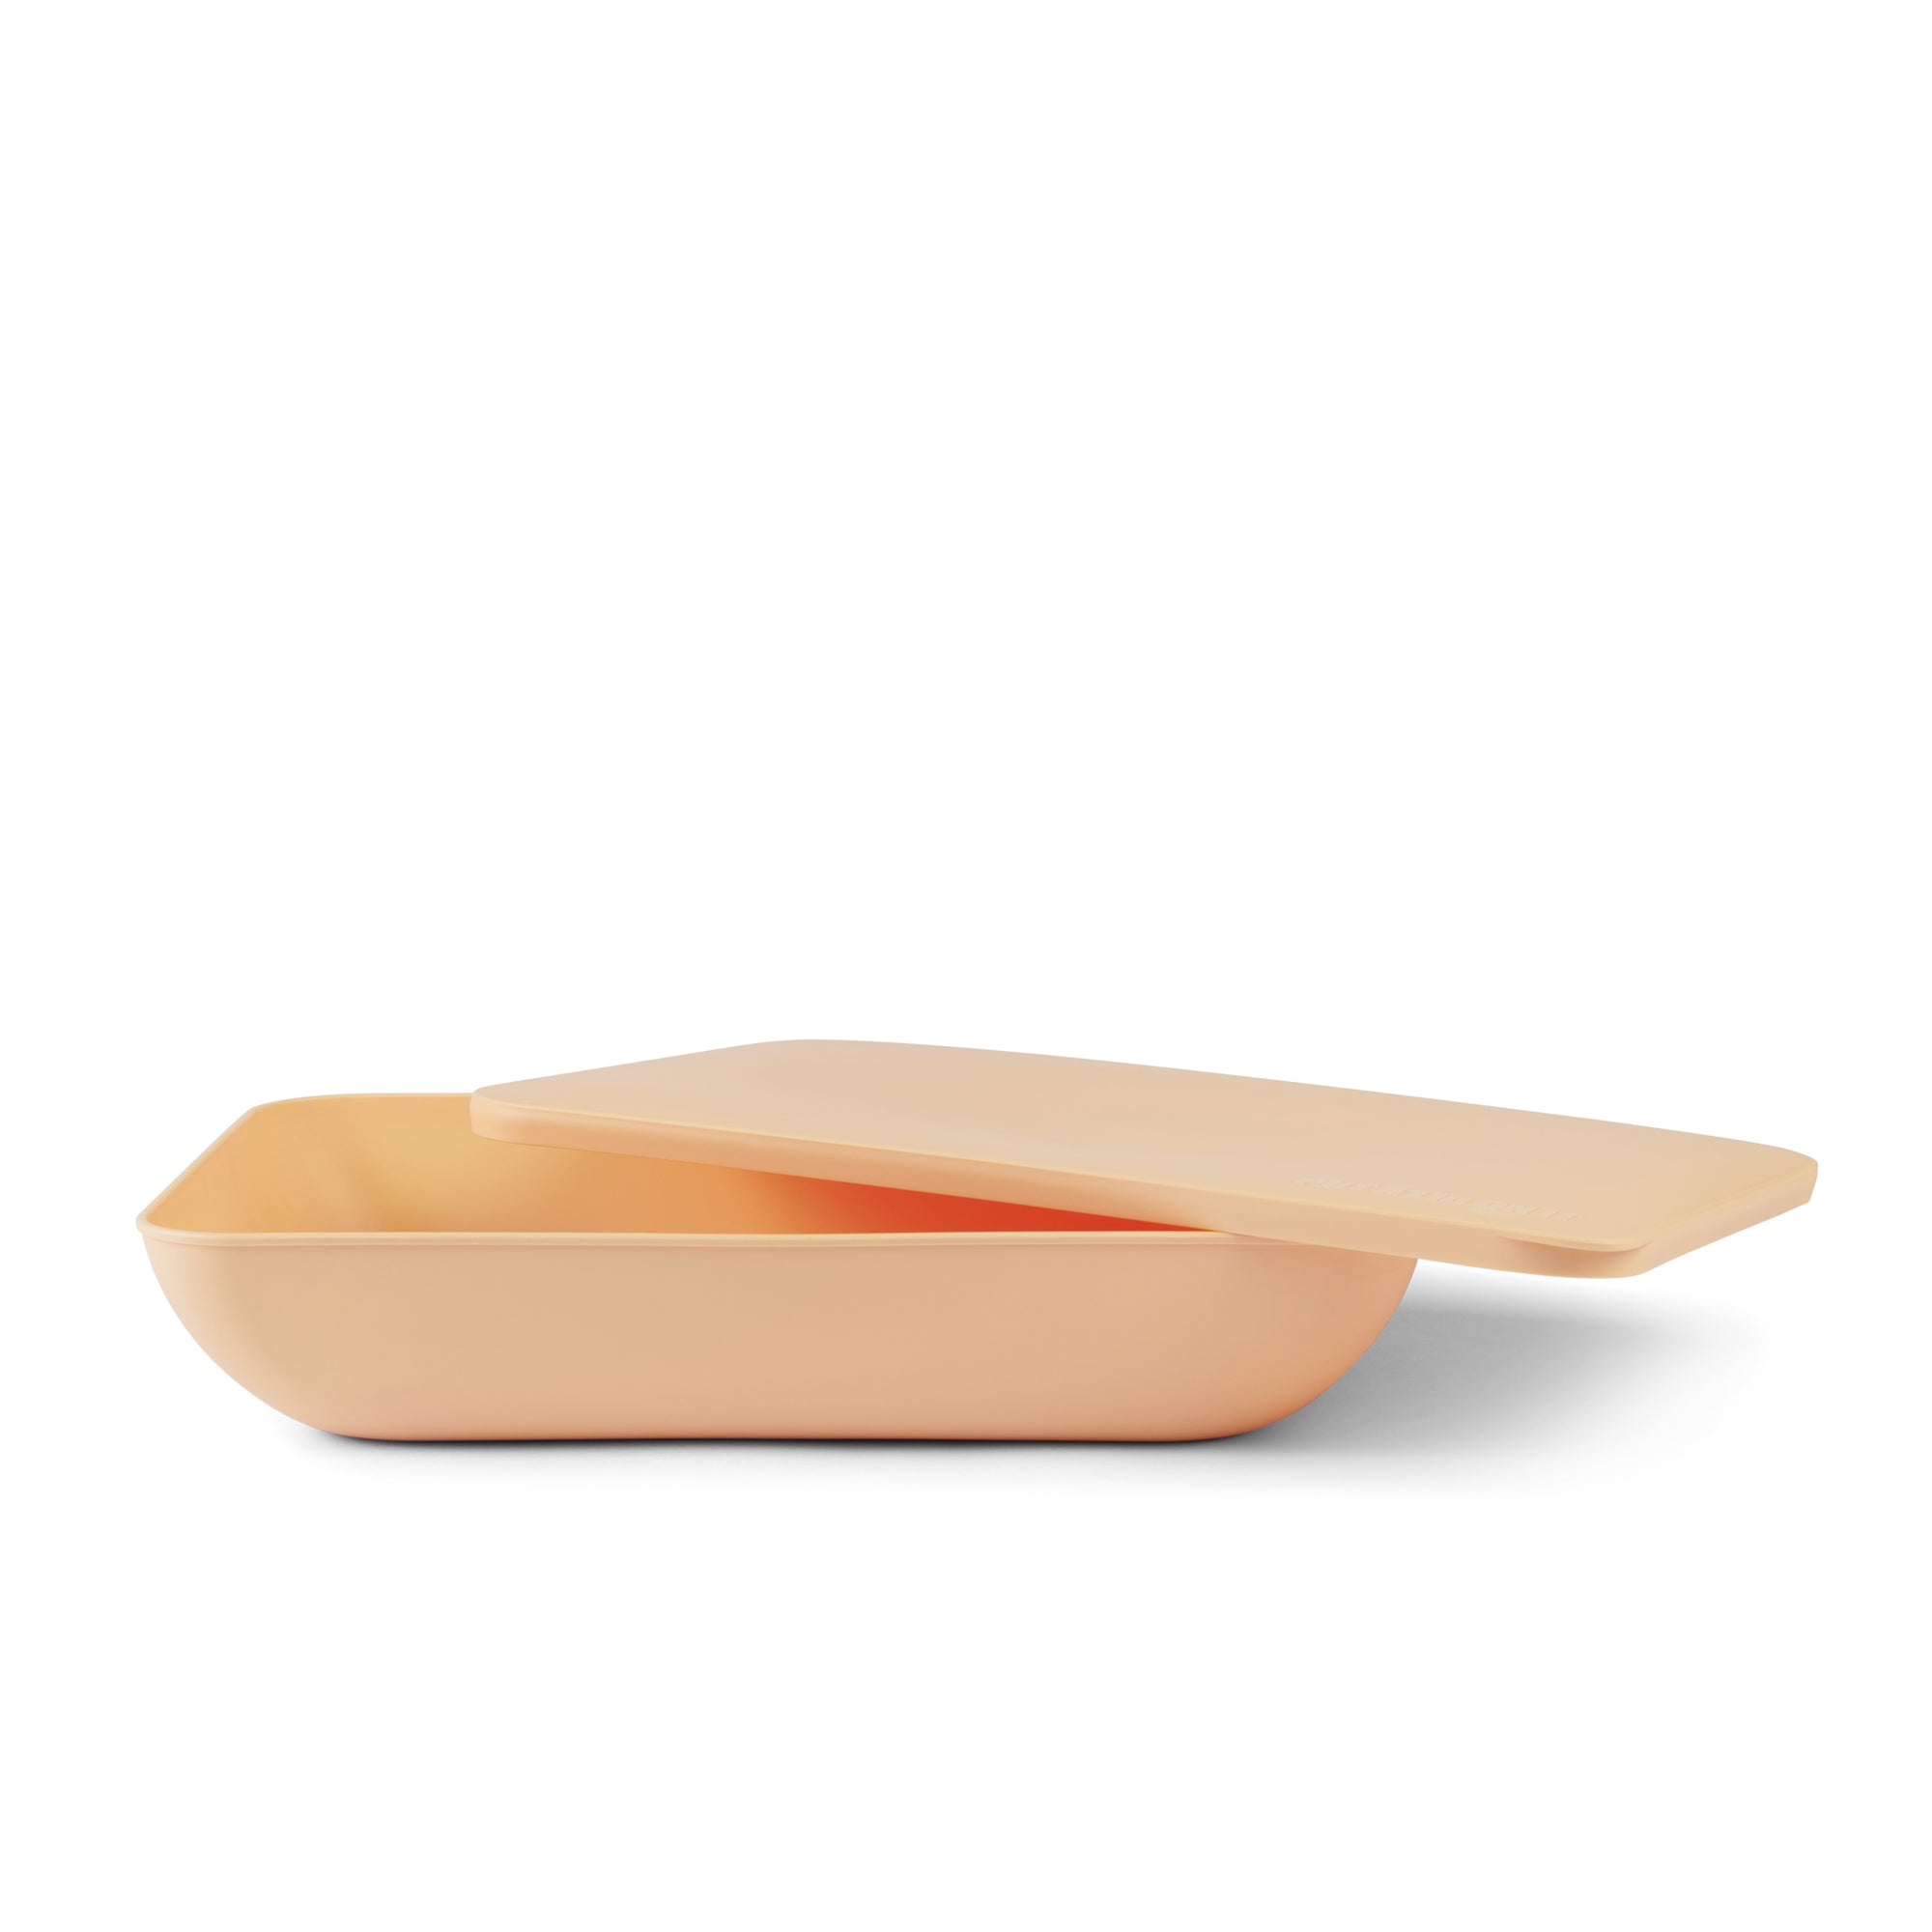 Put a lid on it - Serving platter with a lid - Peach